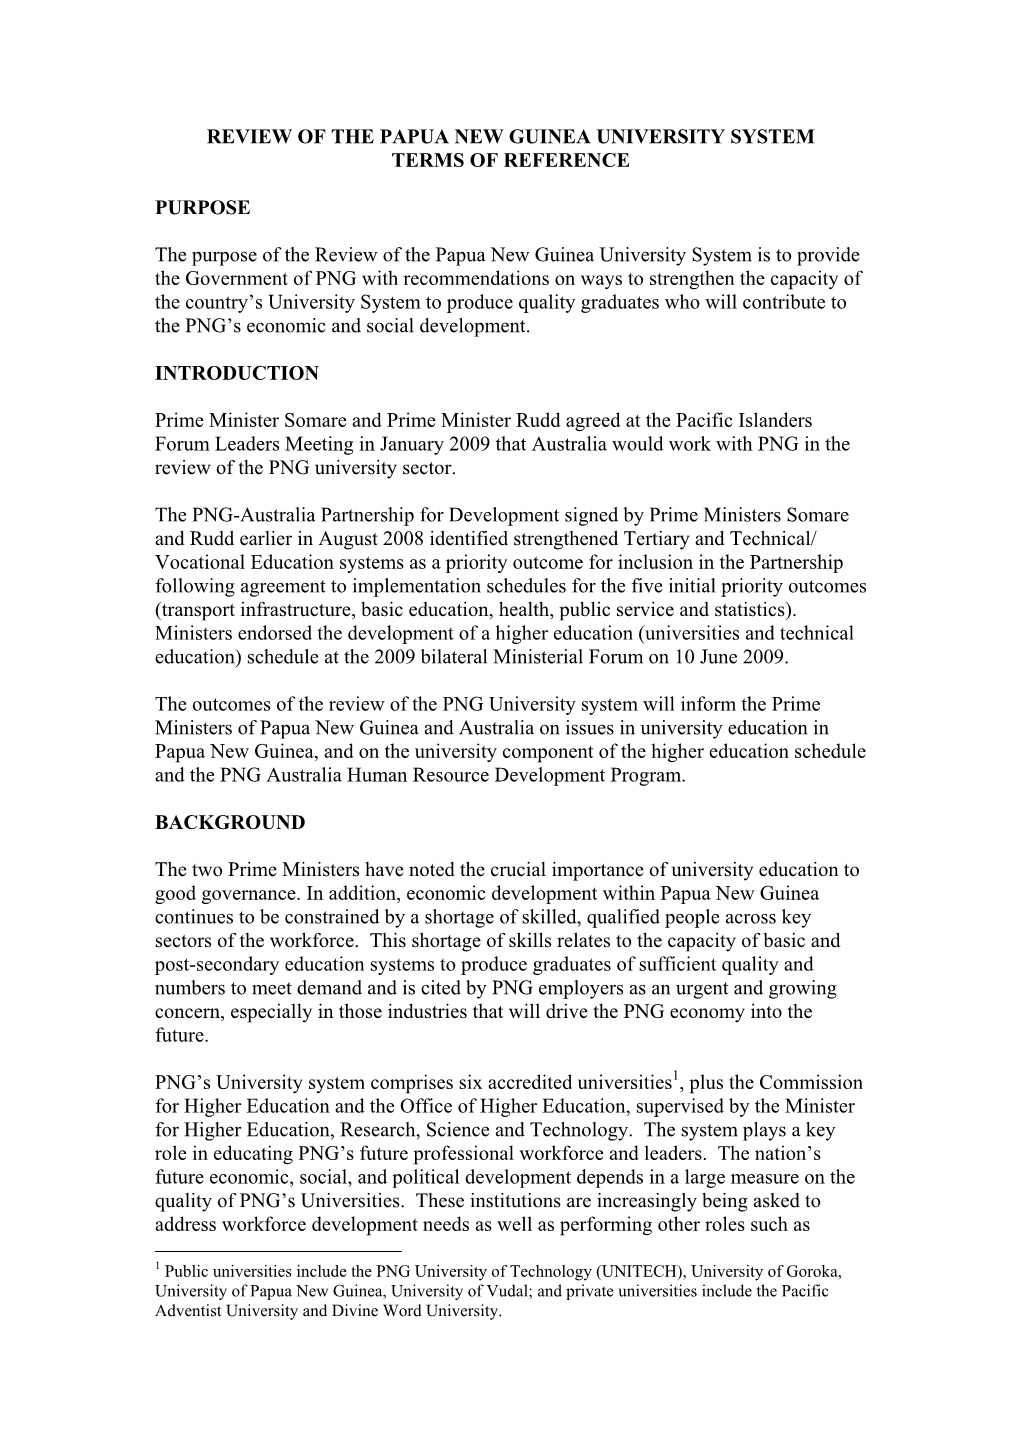 Terms of Reference for the Papua New Guinea Universities Review